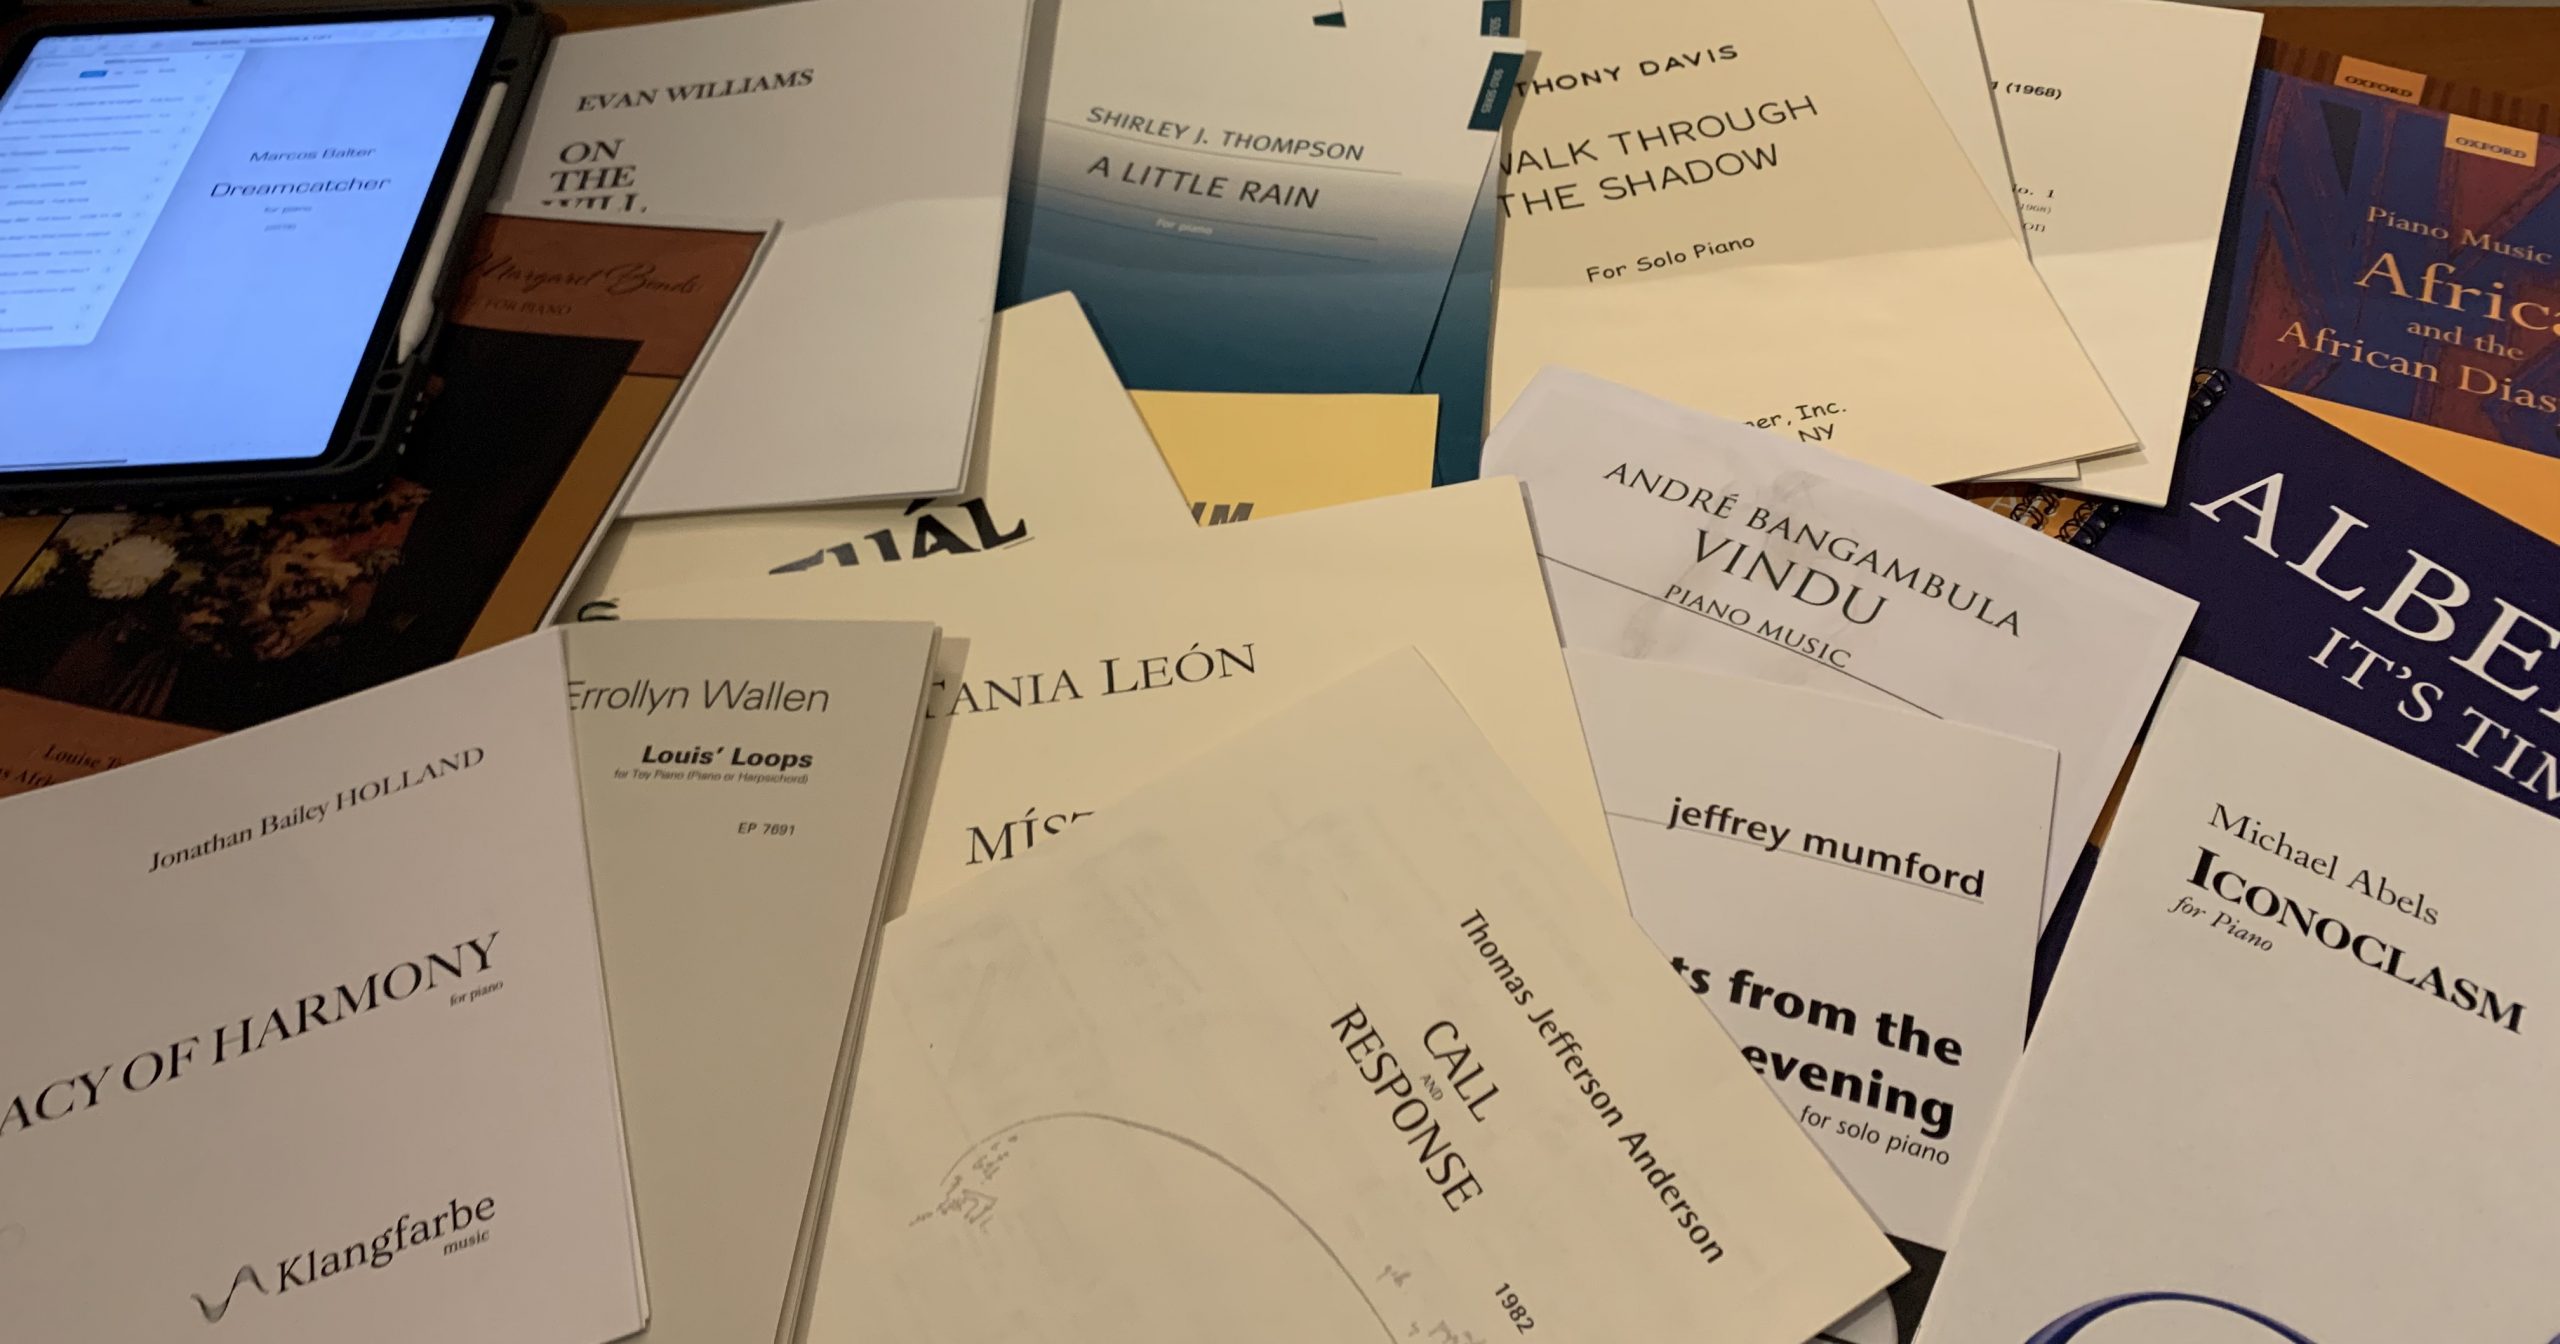 Pile of printed scores of pieces by BIPOC composers, including works by TJ Anderson, Errolyn Wallen, Tania León, Jonathan Bailey Holland, Michael Abels, and others, plus a laptop displaying a PDF score.